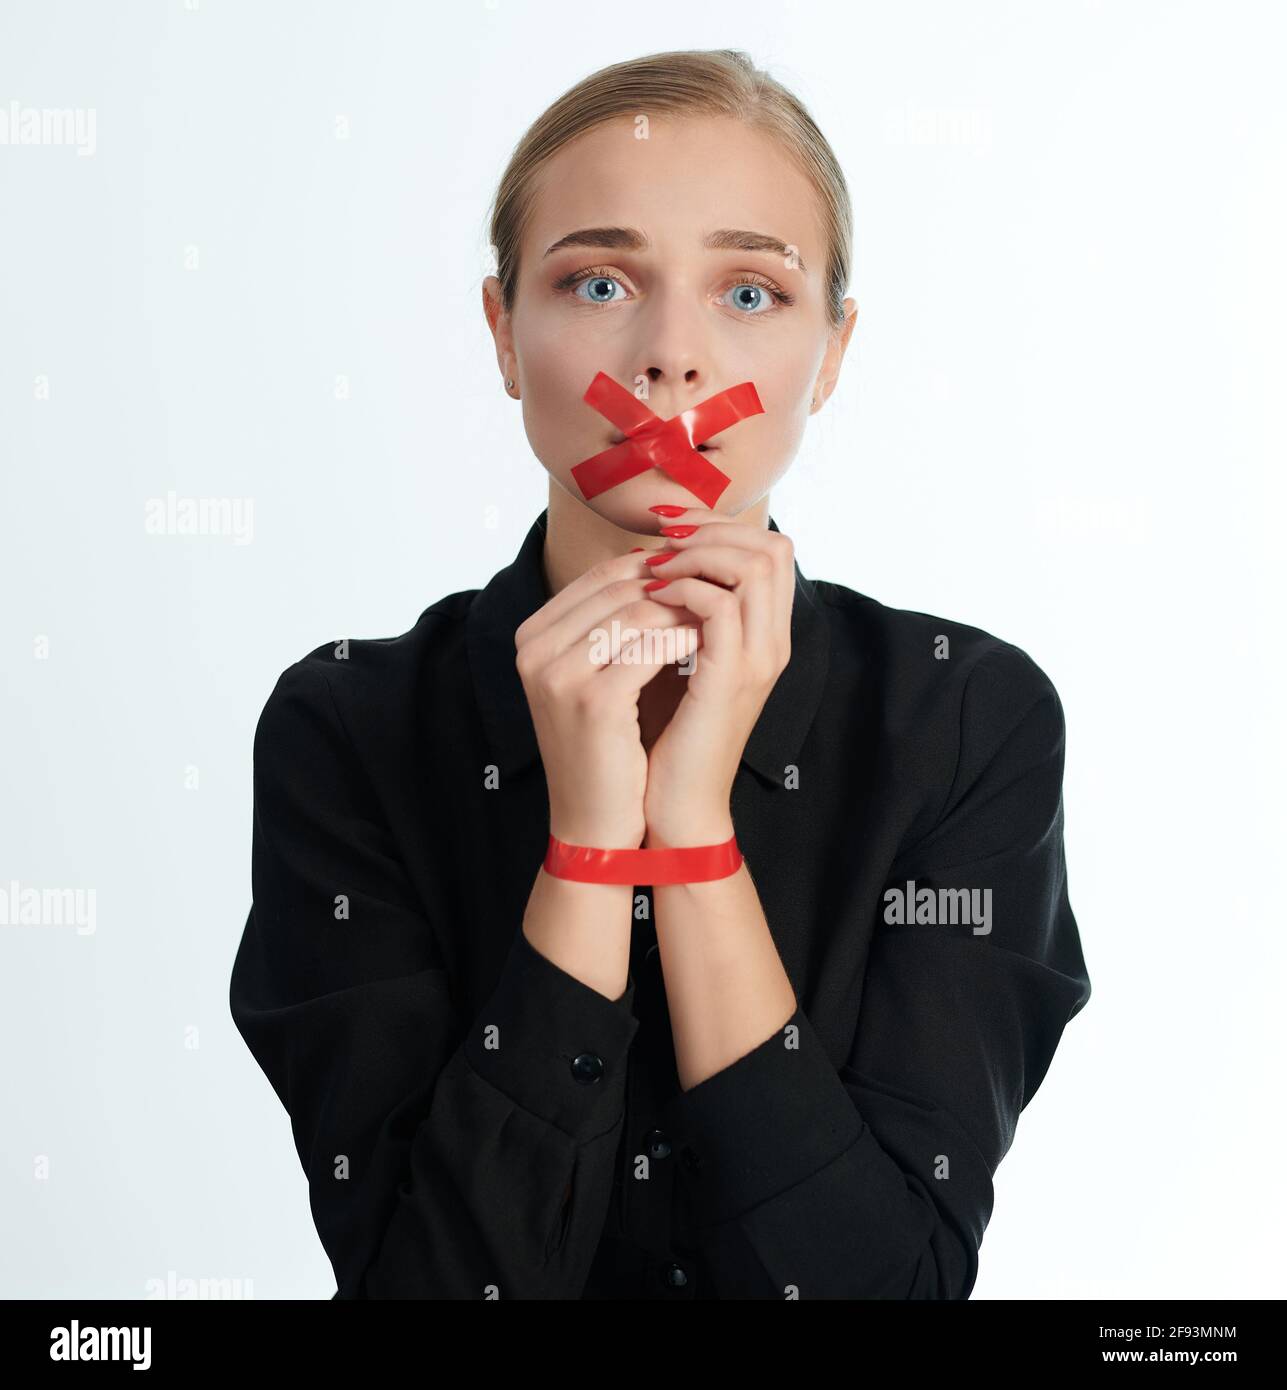 Scared caucasian woman portrait with tape on mouth and hands Stock Photo